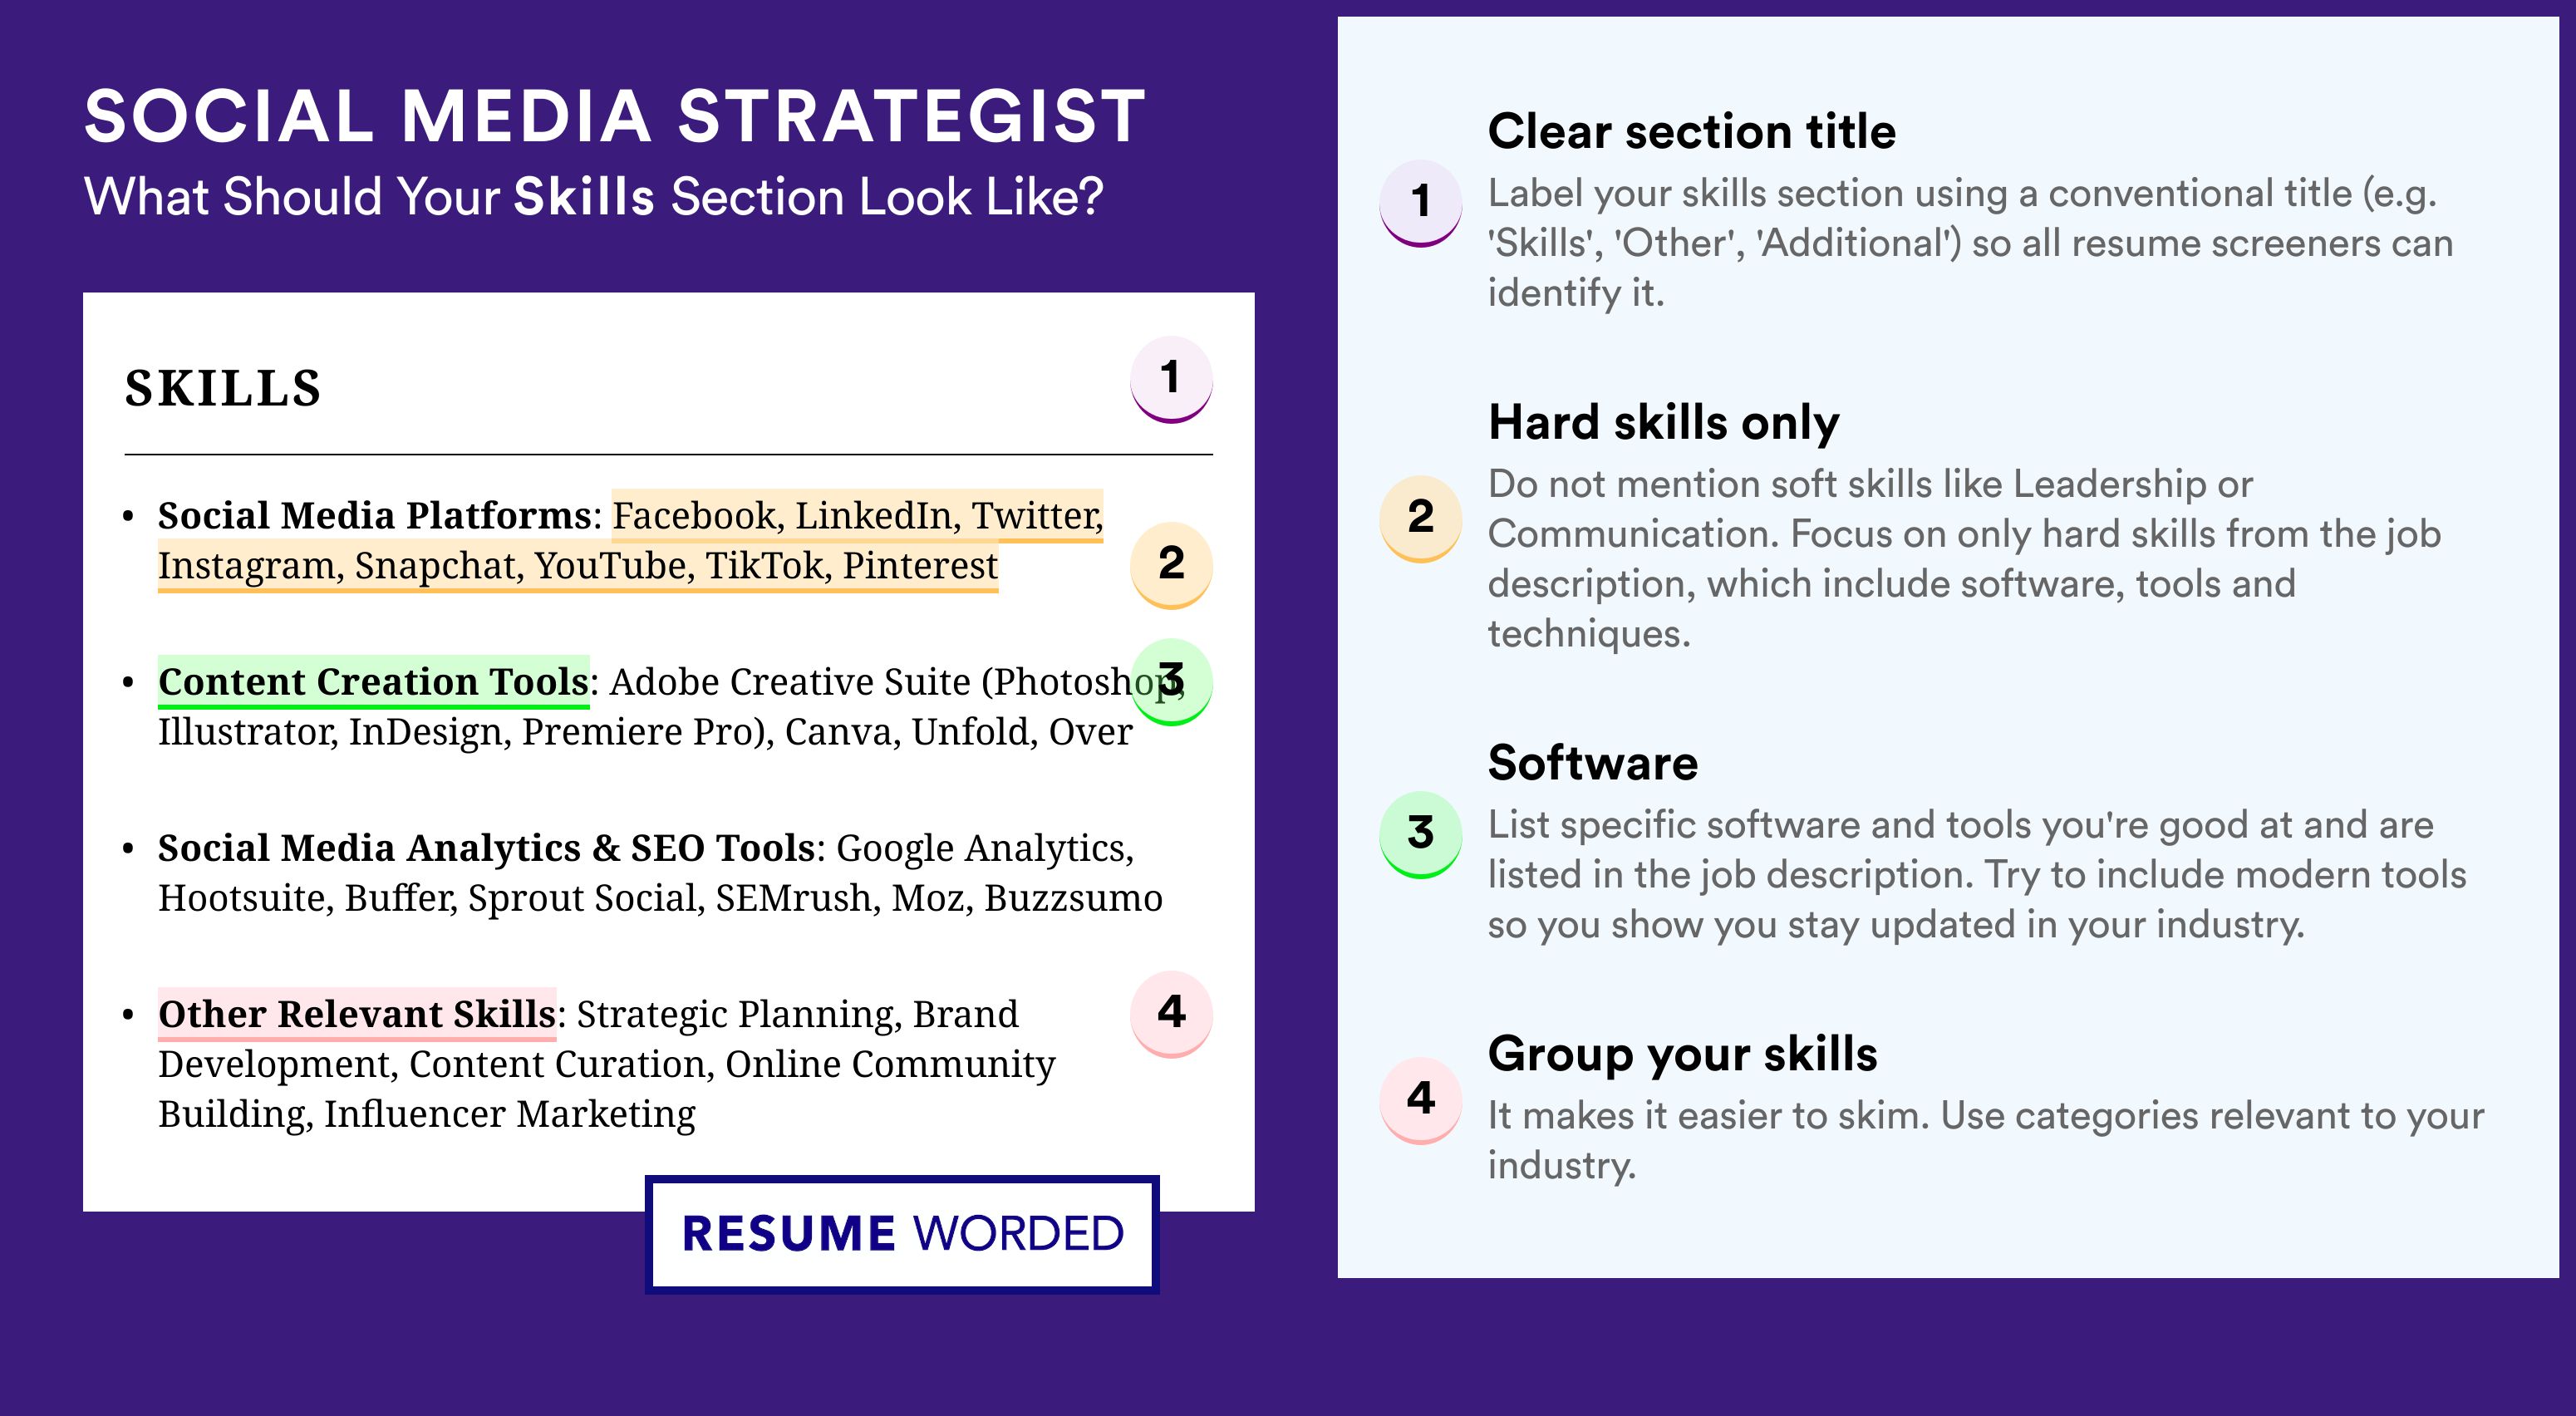 How To Write Your Skills Section - Social Media Strategist Roles